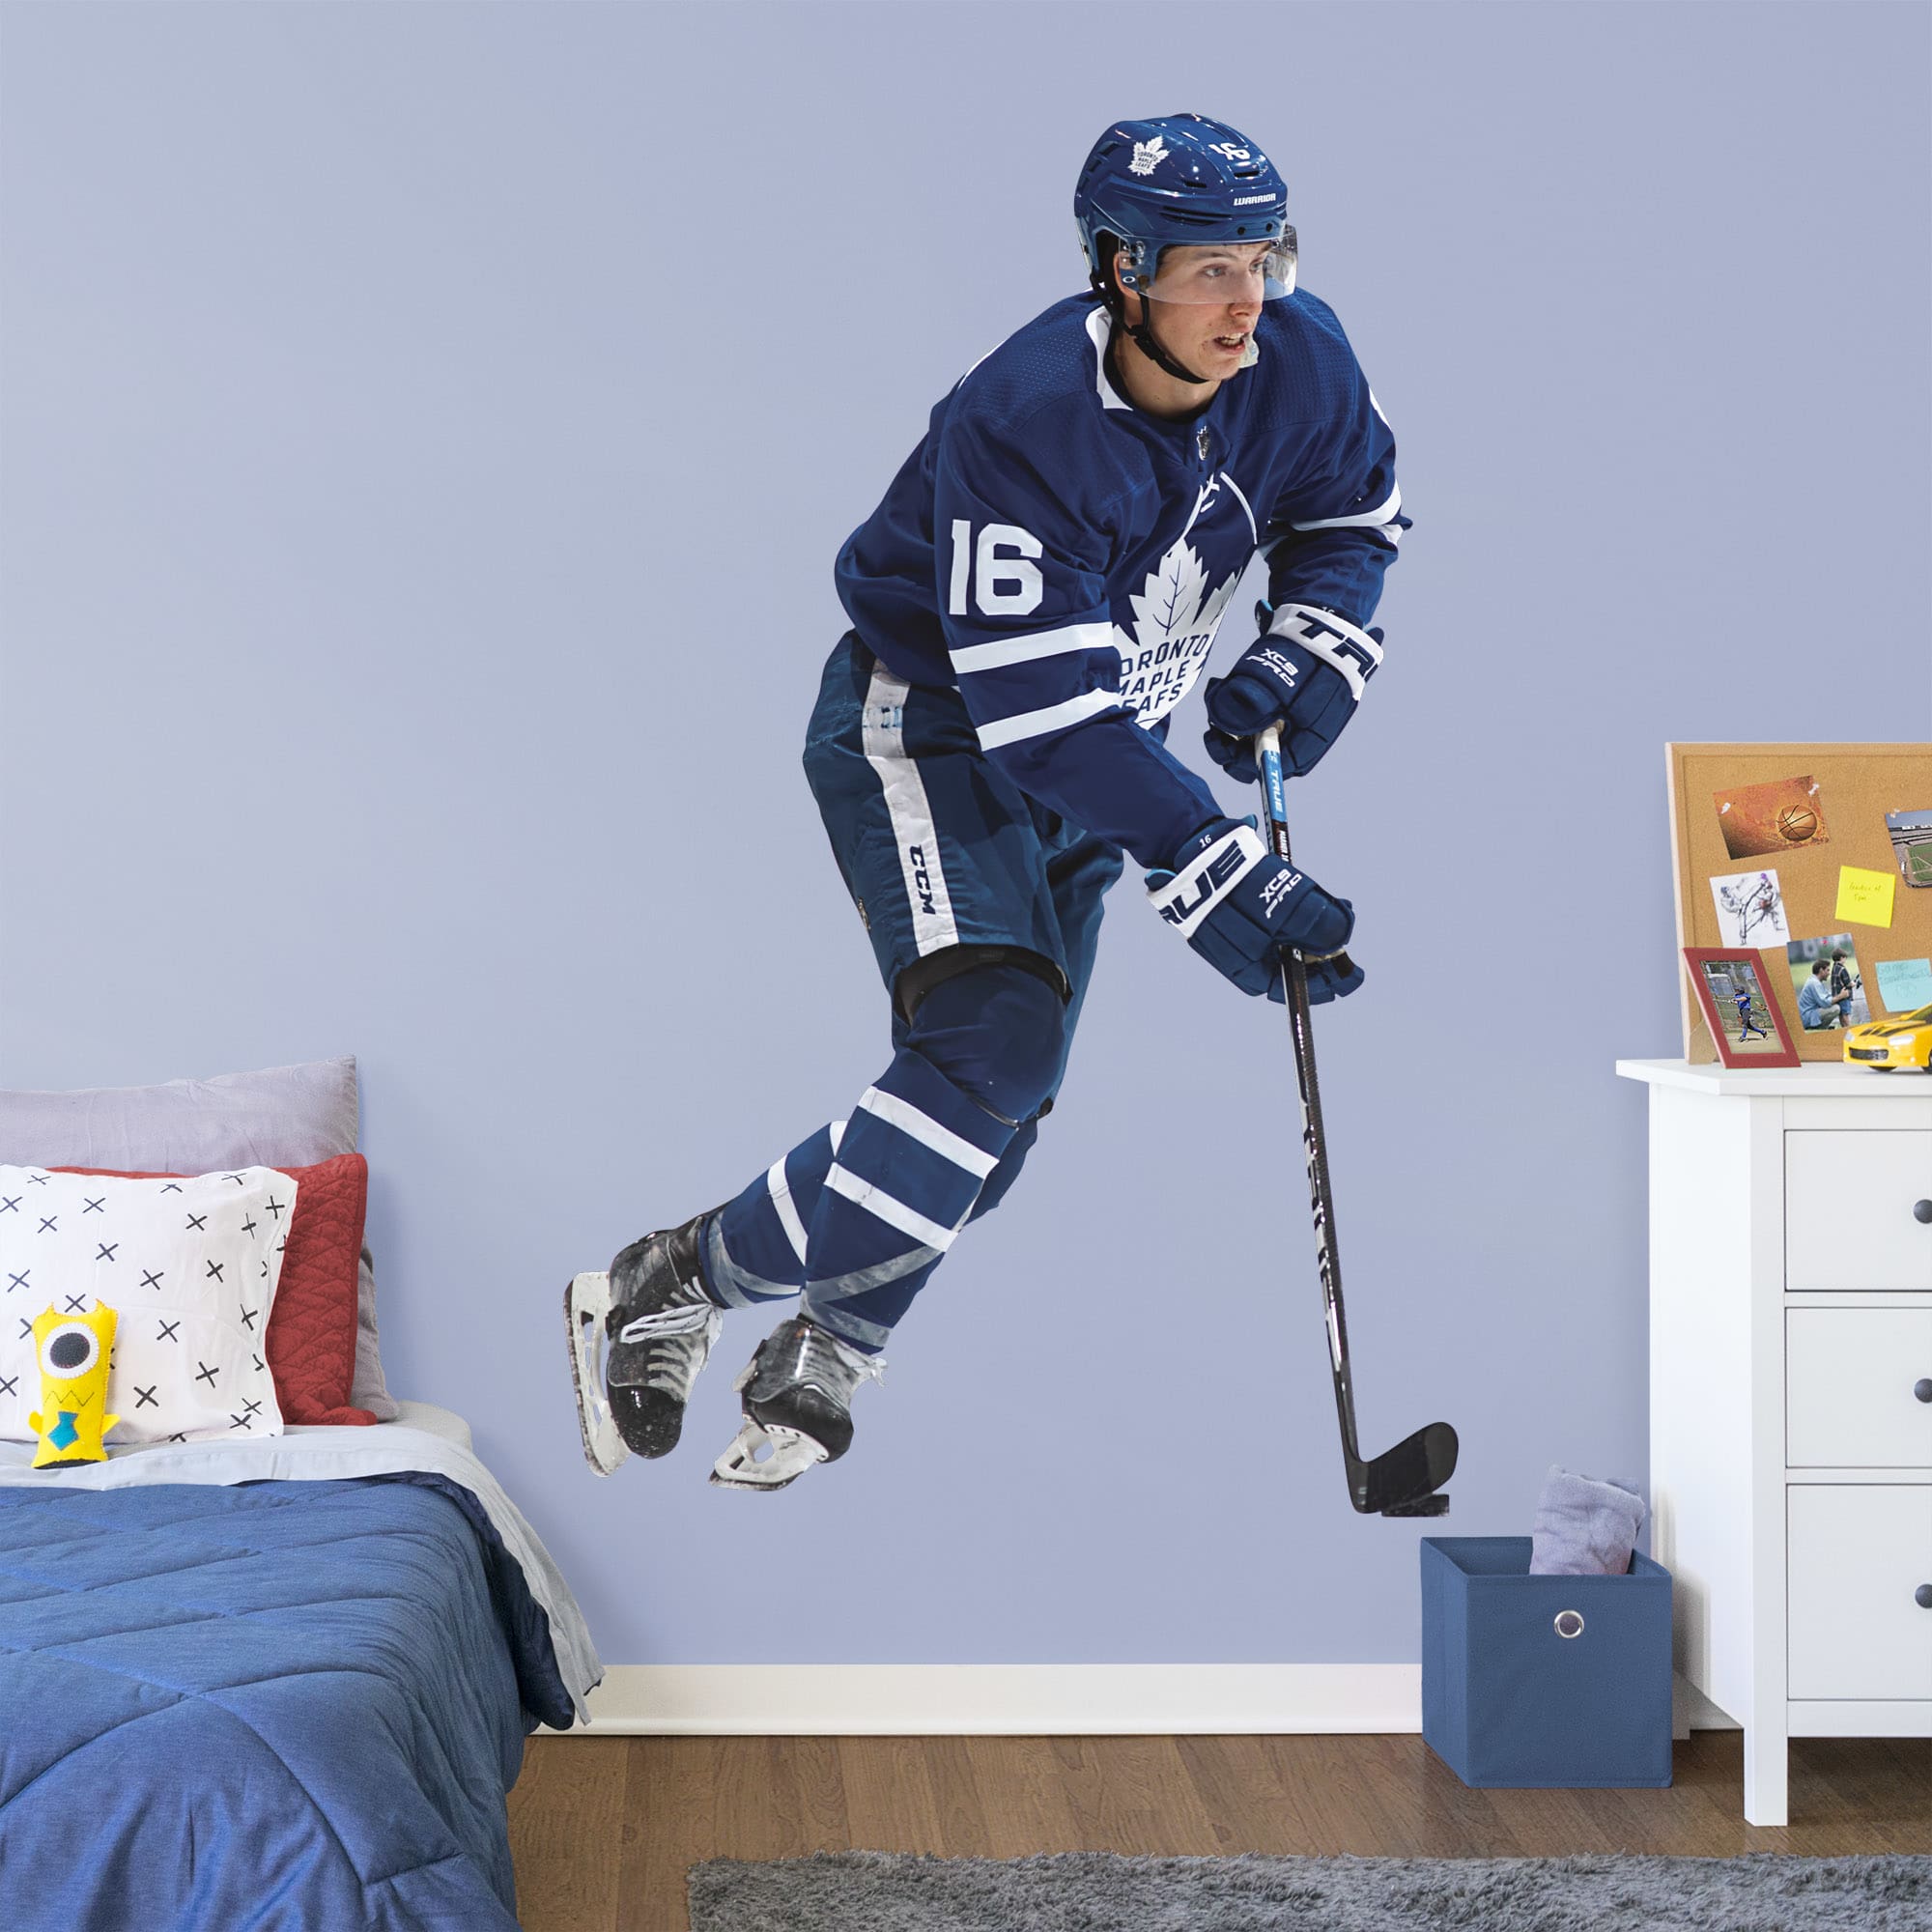 Mitch Marner for Toronto Maple Leafs - Officially Licensed NHL Removable Wall Decal Giant Athlete + 2 Decals (32"W x 51"H) by Fa